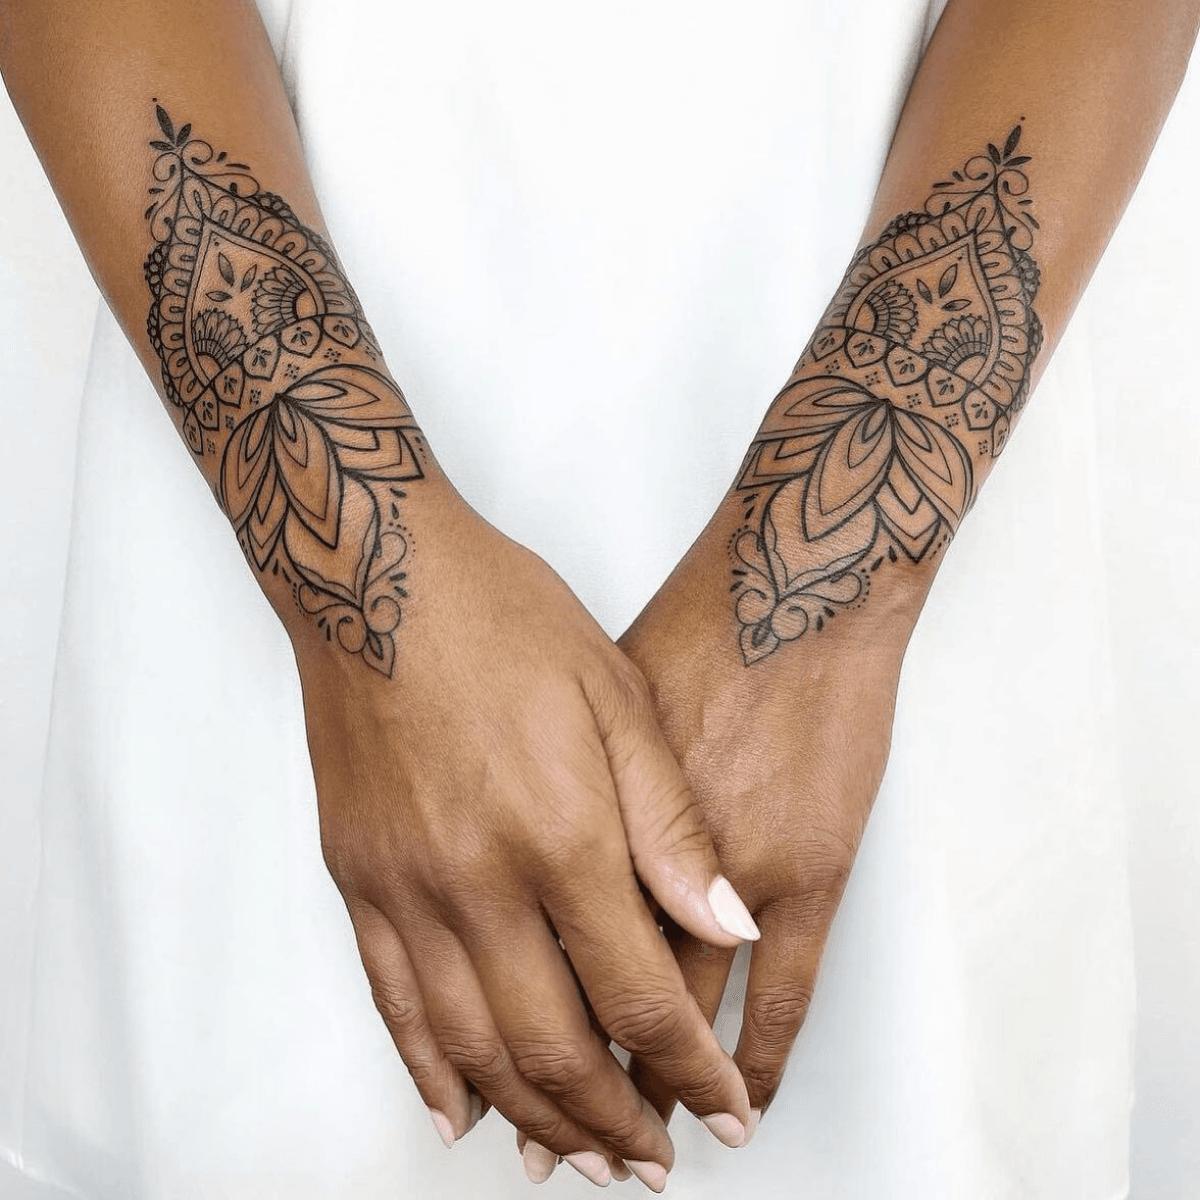 Trendy Gen Z Tattoos That Could Look Outdated Soon